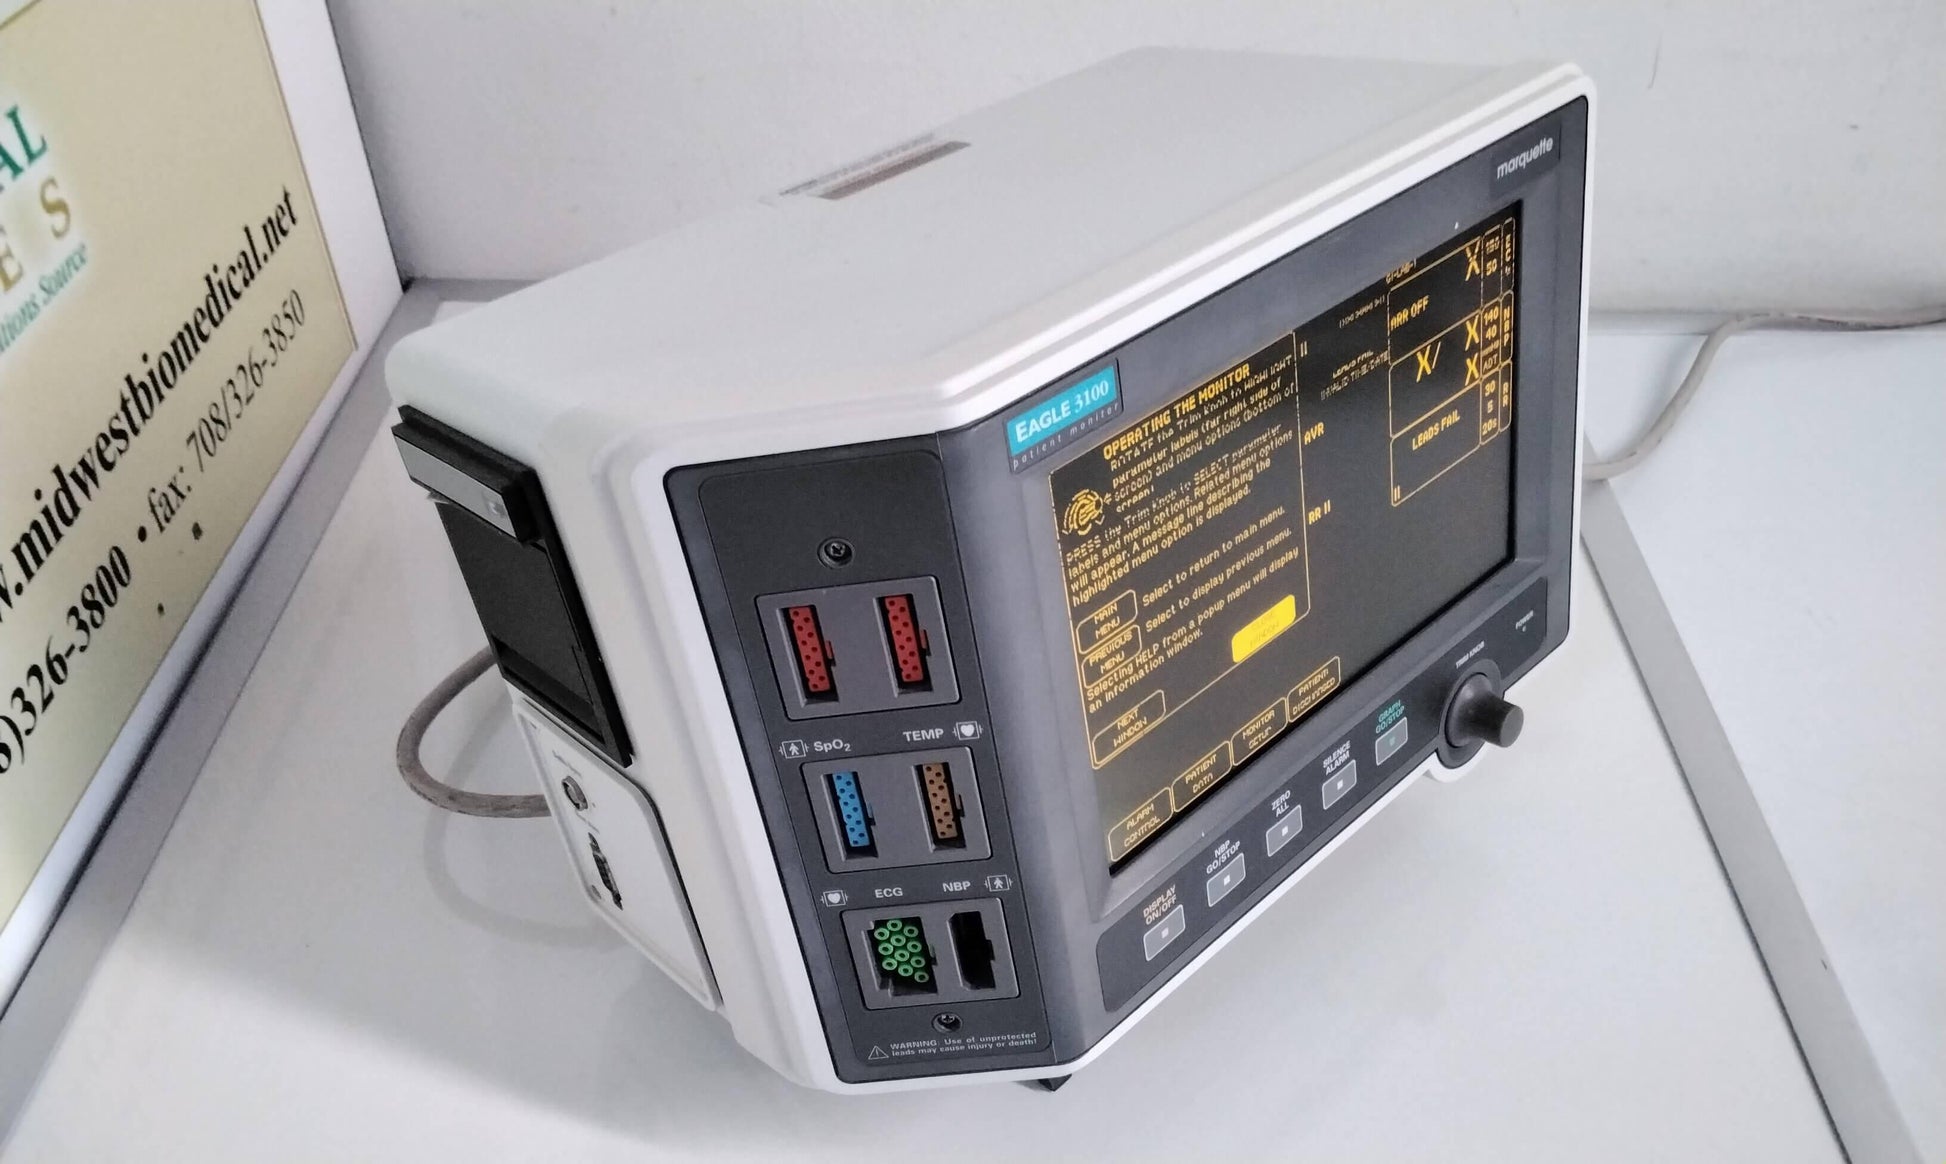 USED GE Marquette Eagle 3100 Patient Monitor with Free Shipping and Warranty - MBR Medicals